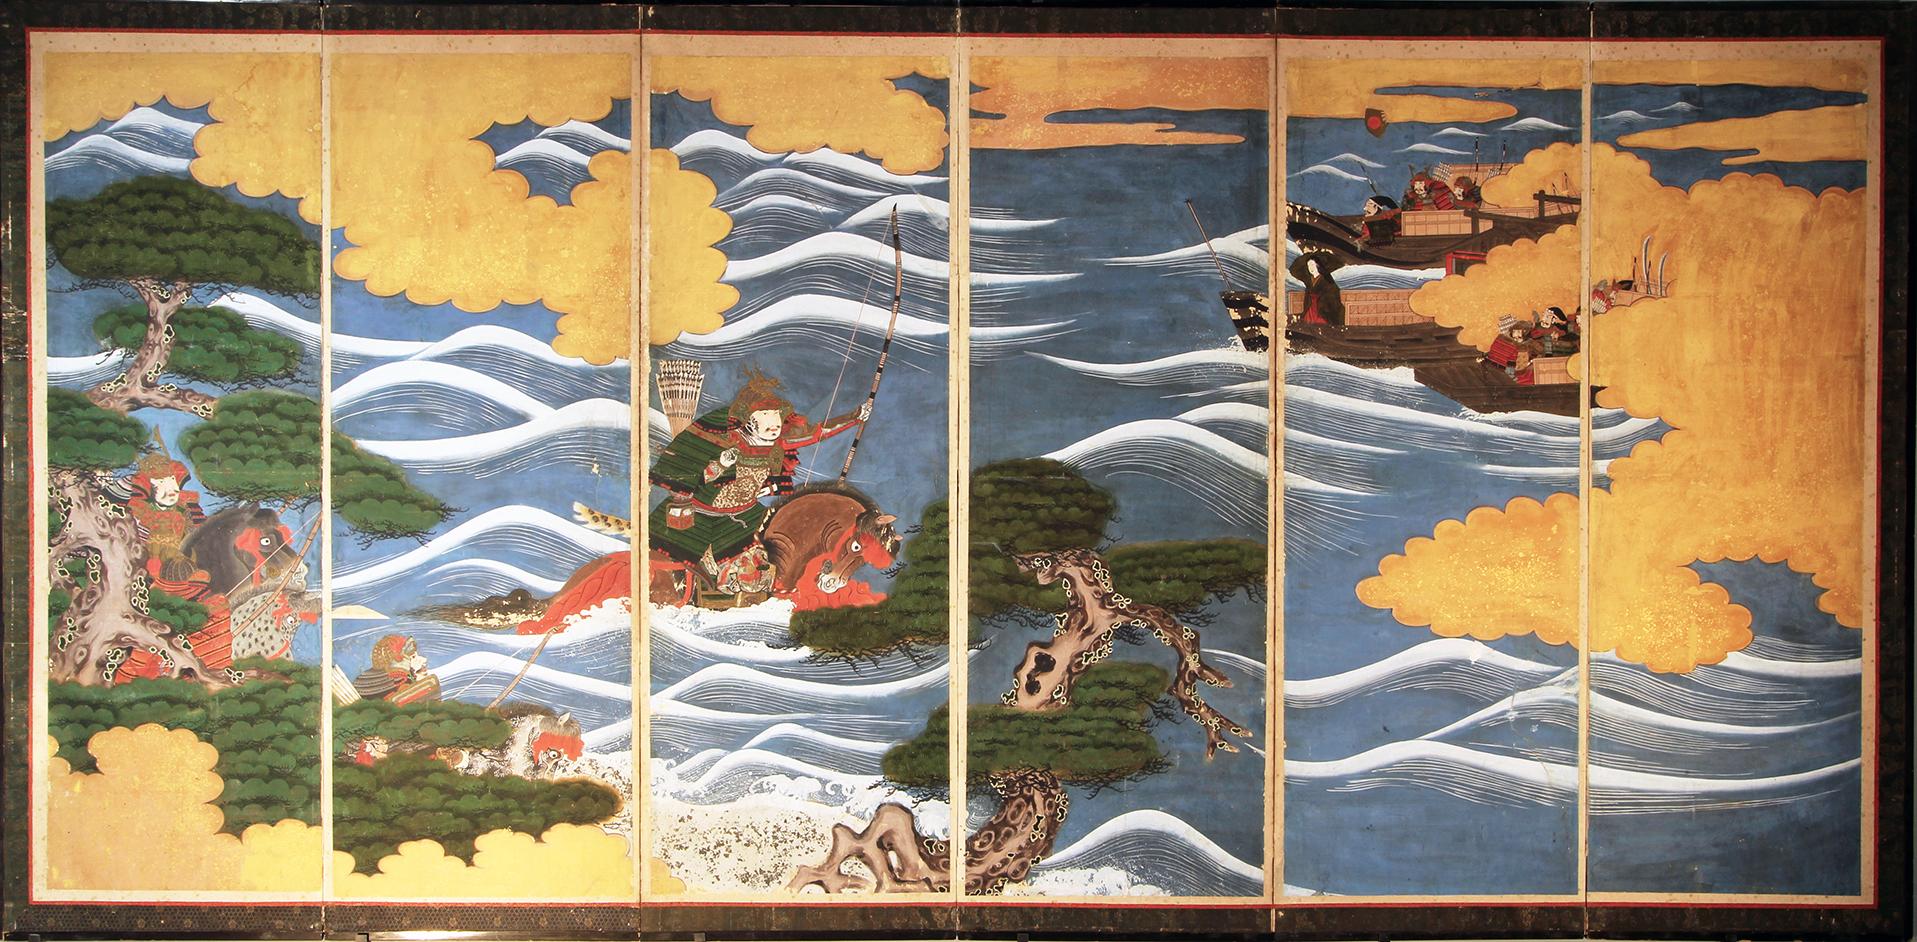 Samurai on horseback and by boat from the famous battle of Kawanakajima Japanese folding screen six-panel painted with mineral pigments on vegetable paper, early 19th century.